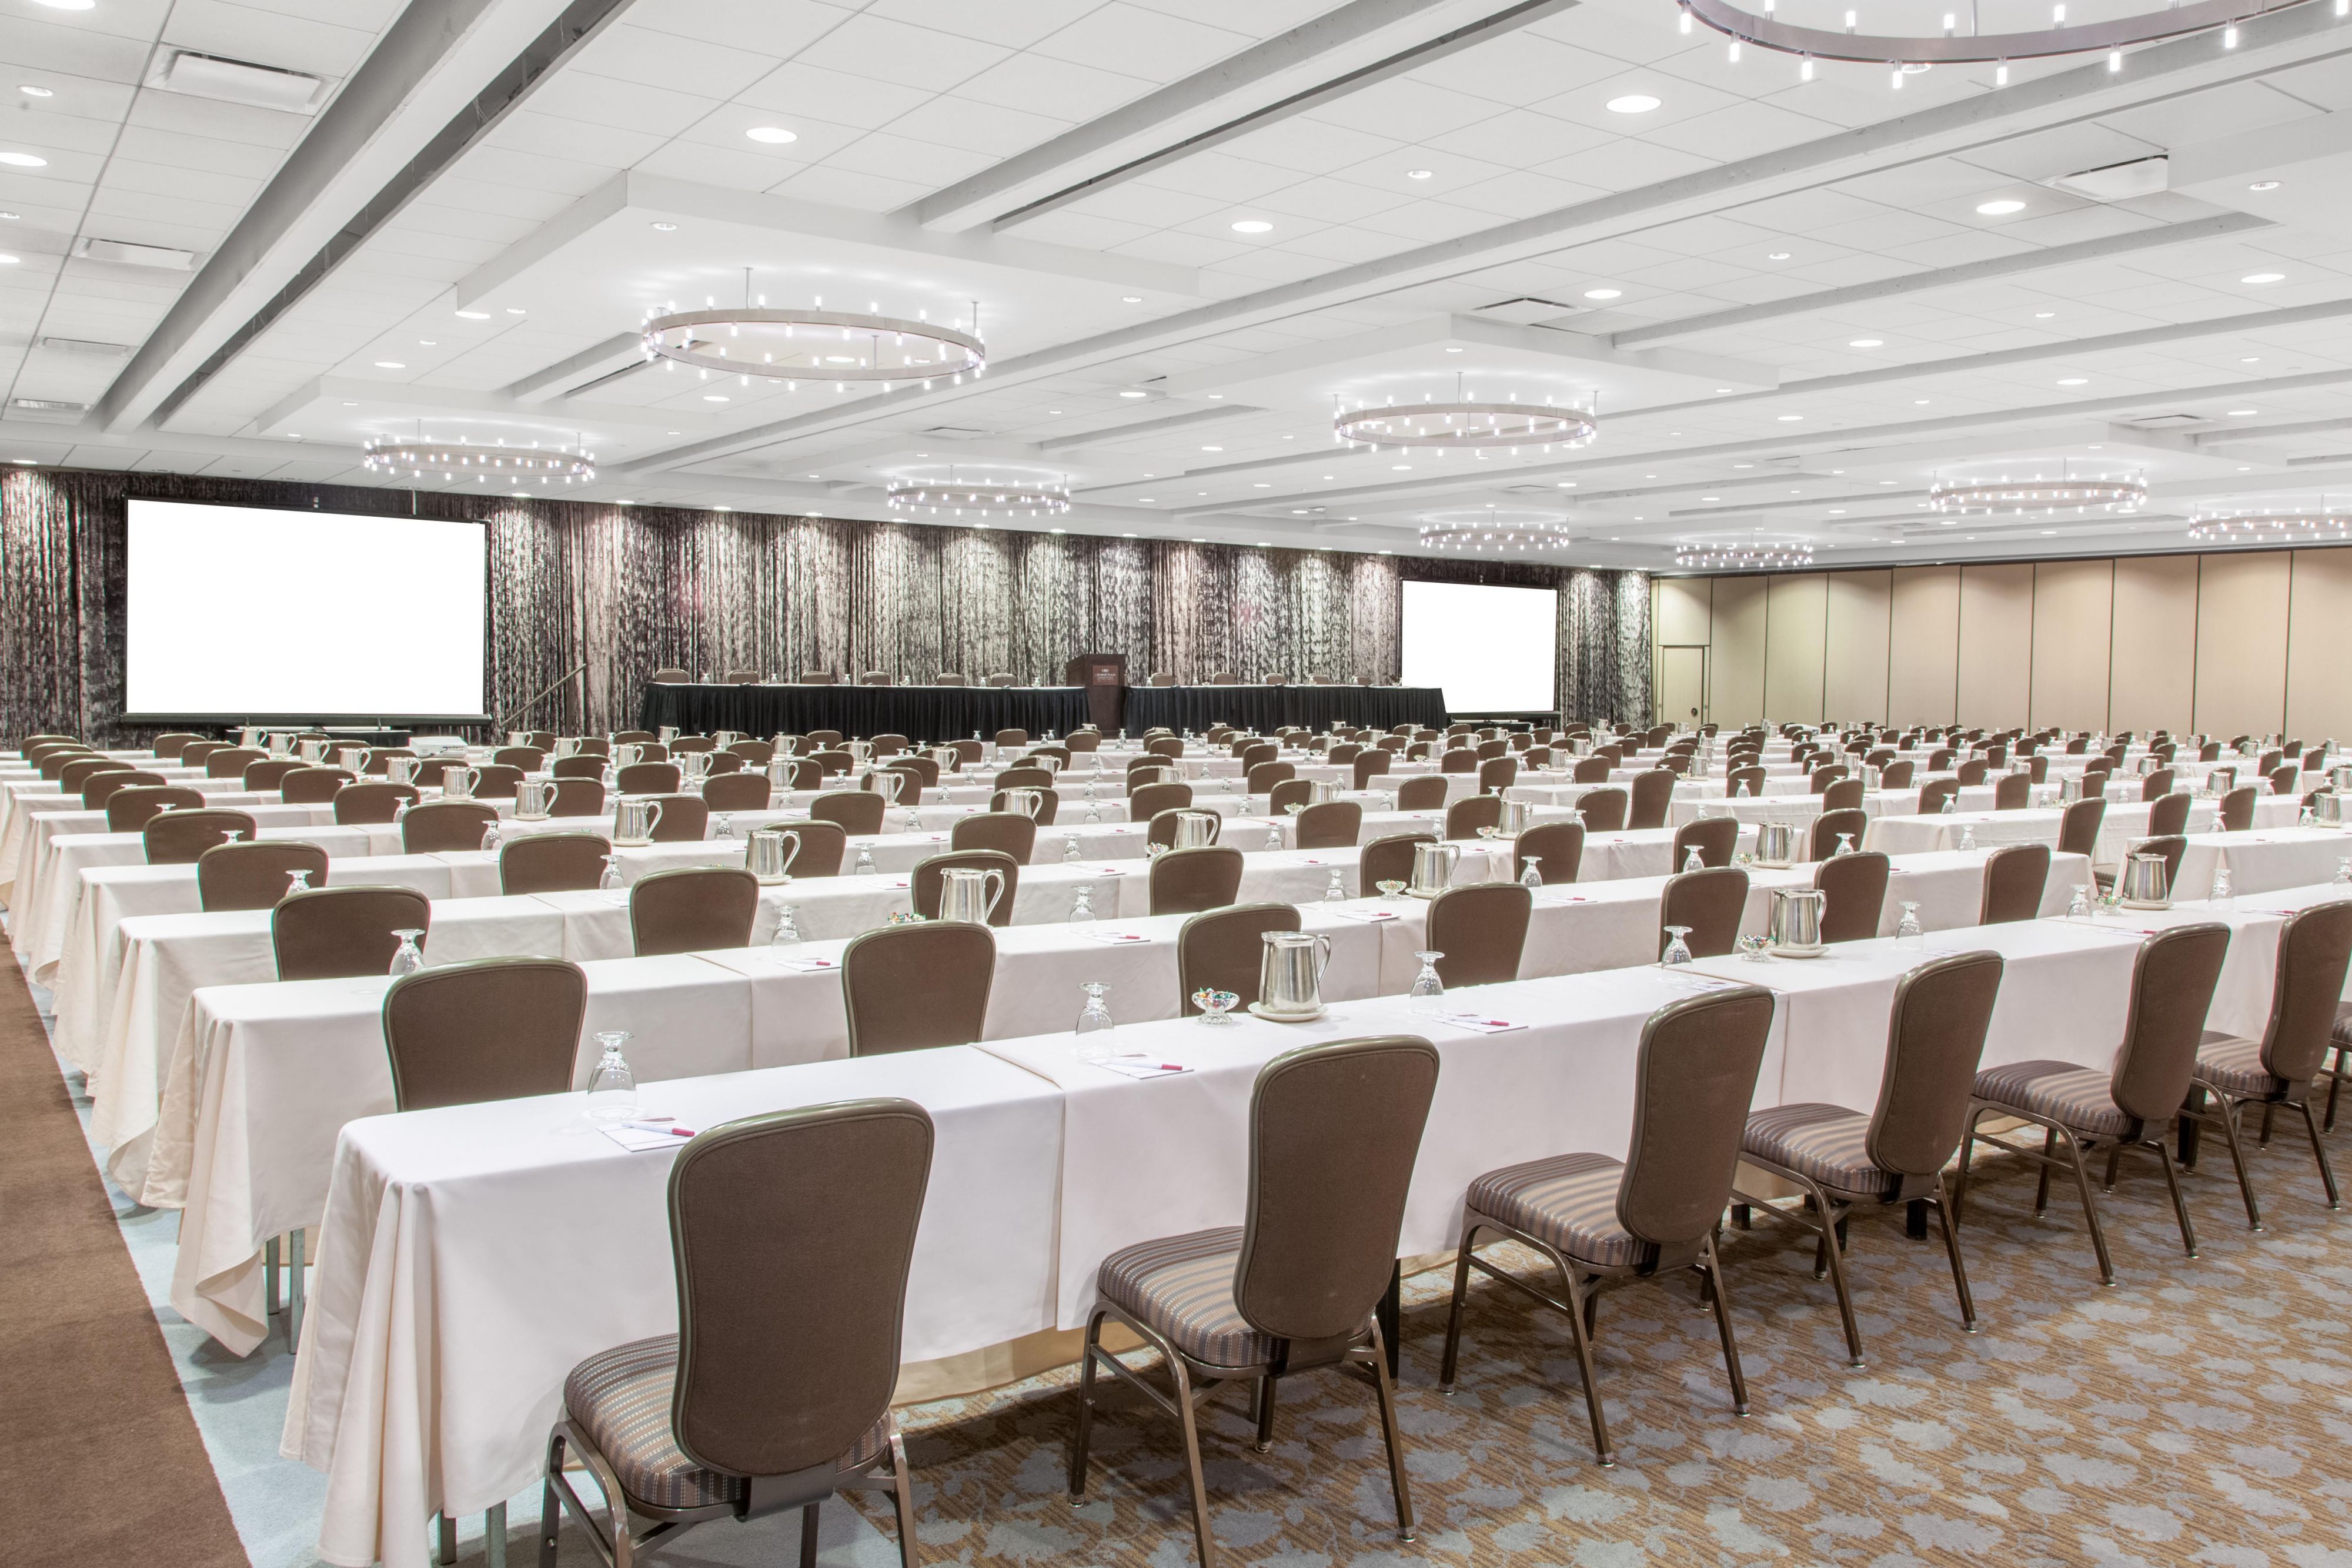 Meeting space that can accommodate a large group with long tables and white linens